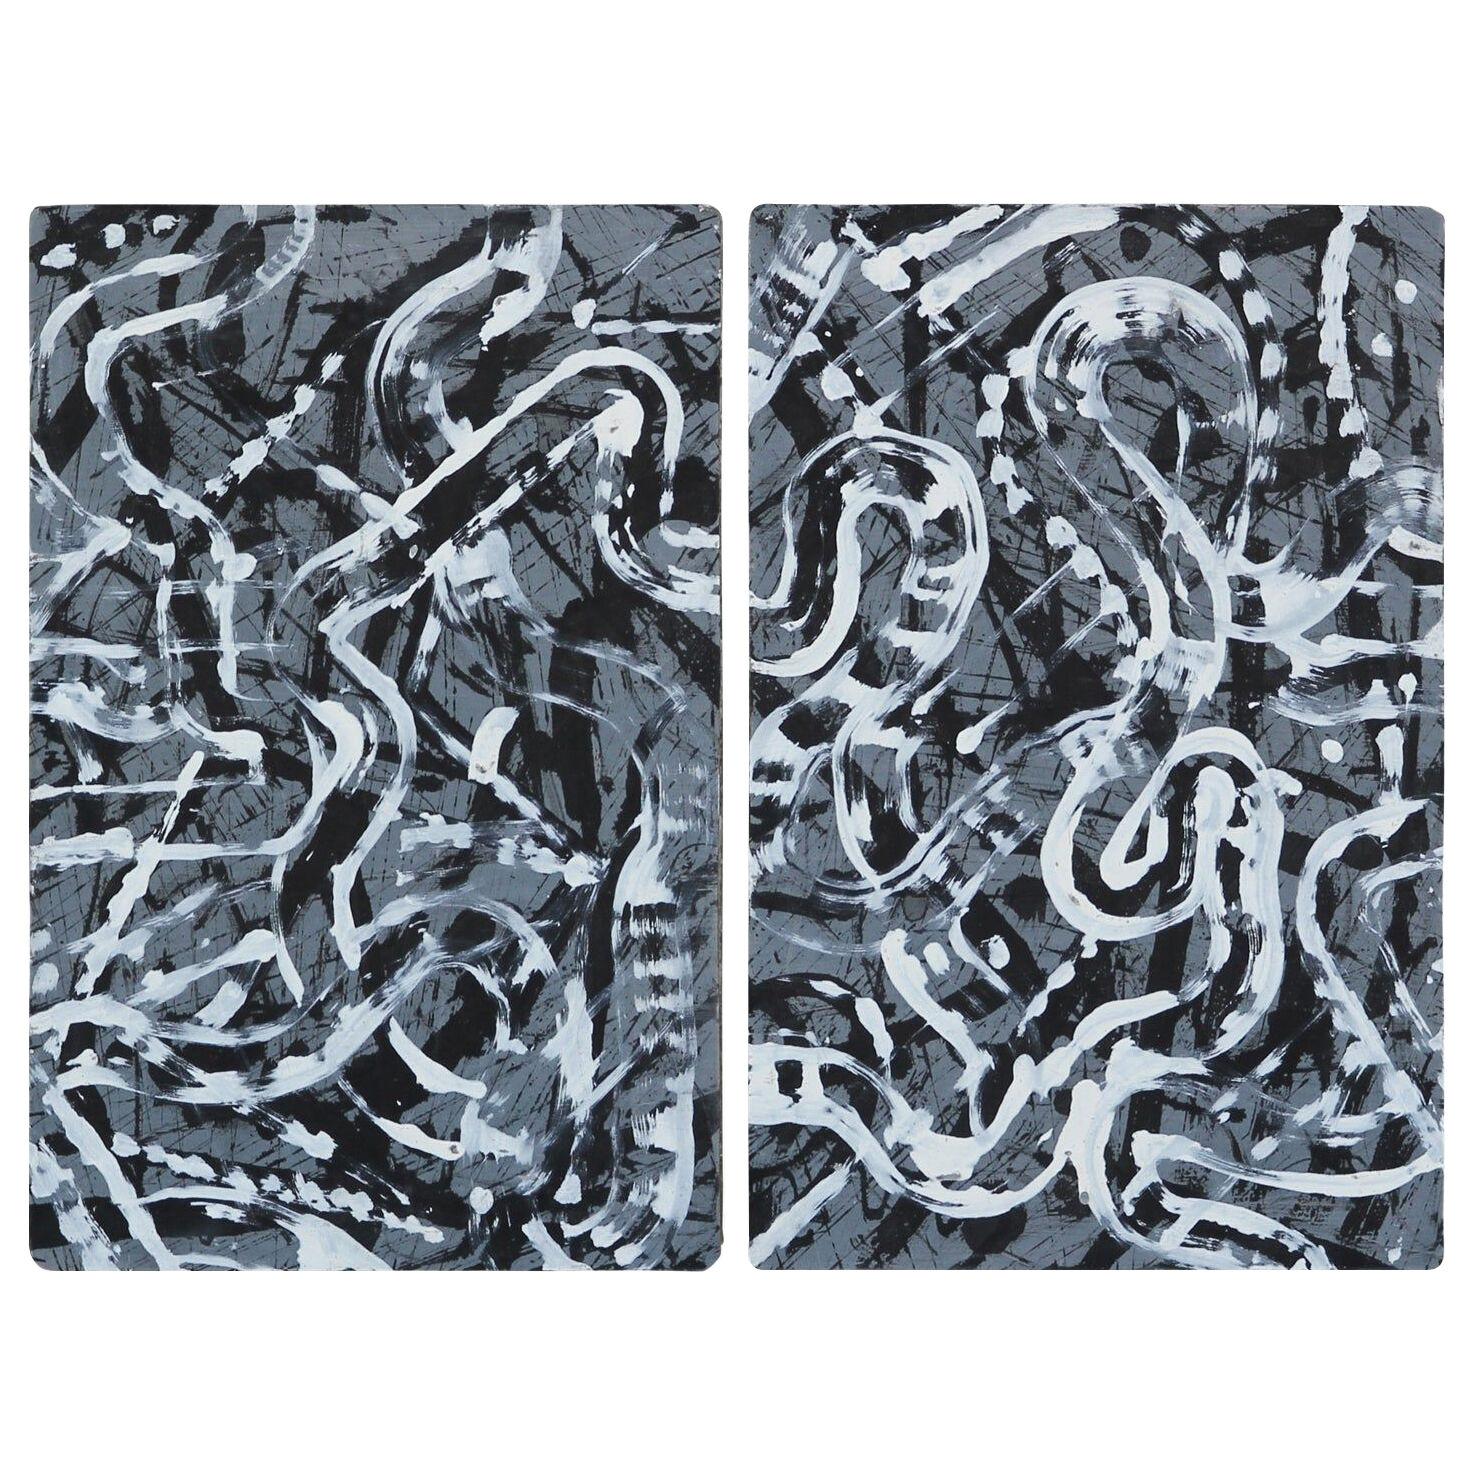 "Desperado" Black and White Abstract Expressionist Diptych 